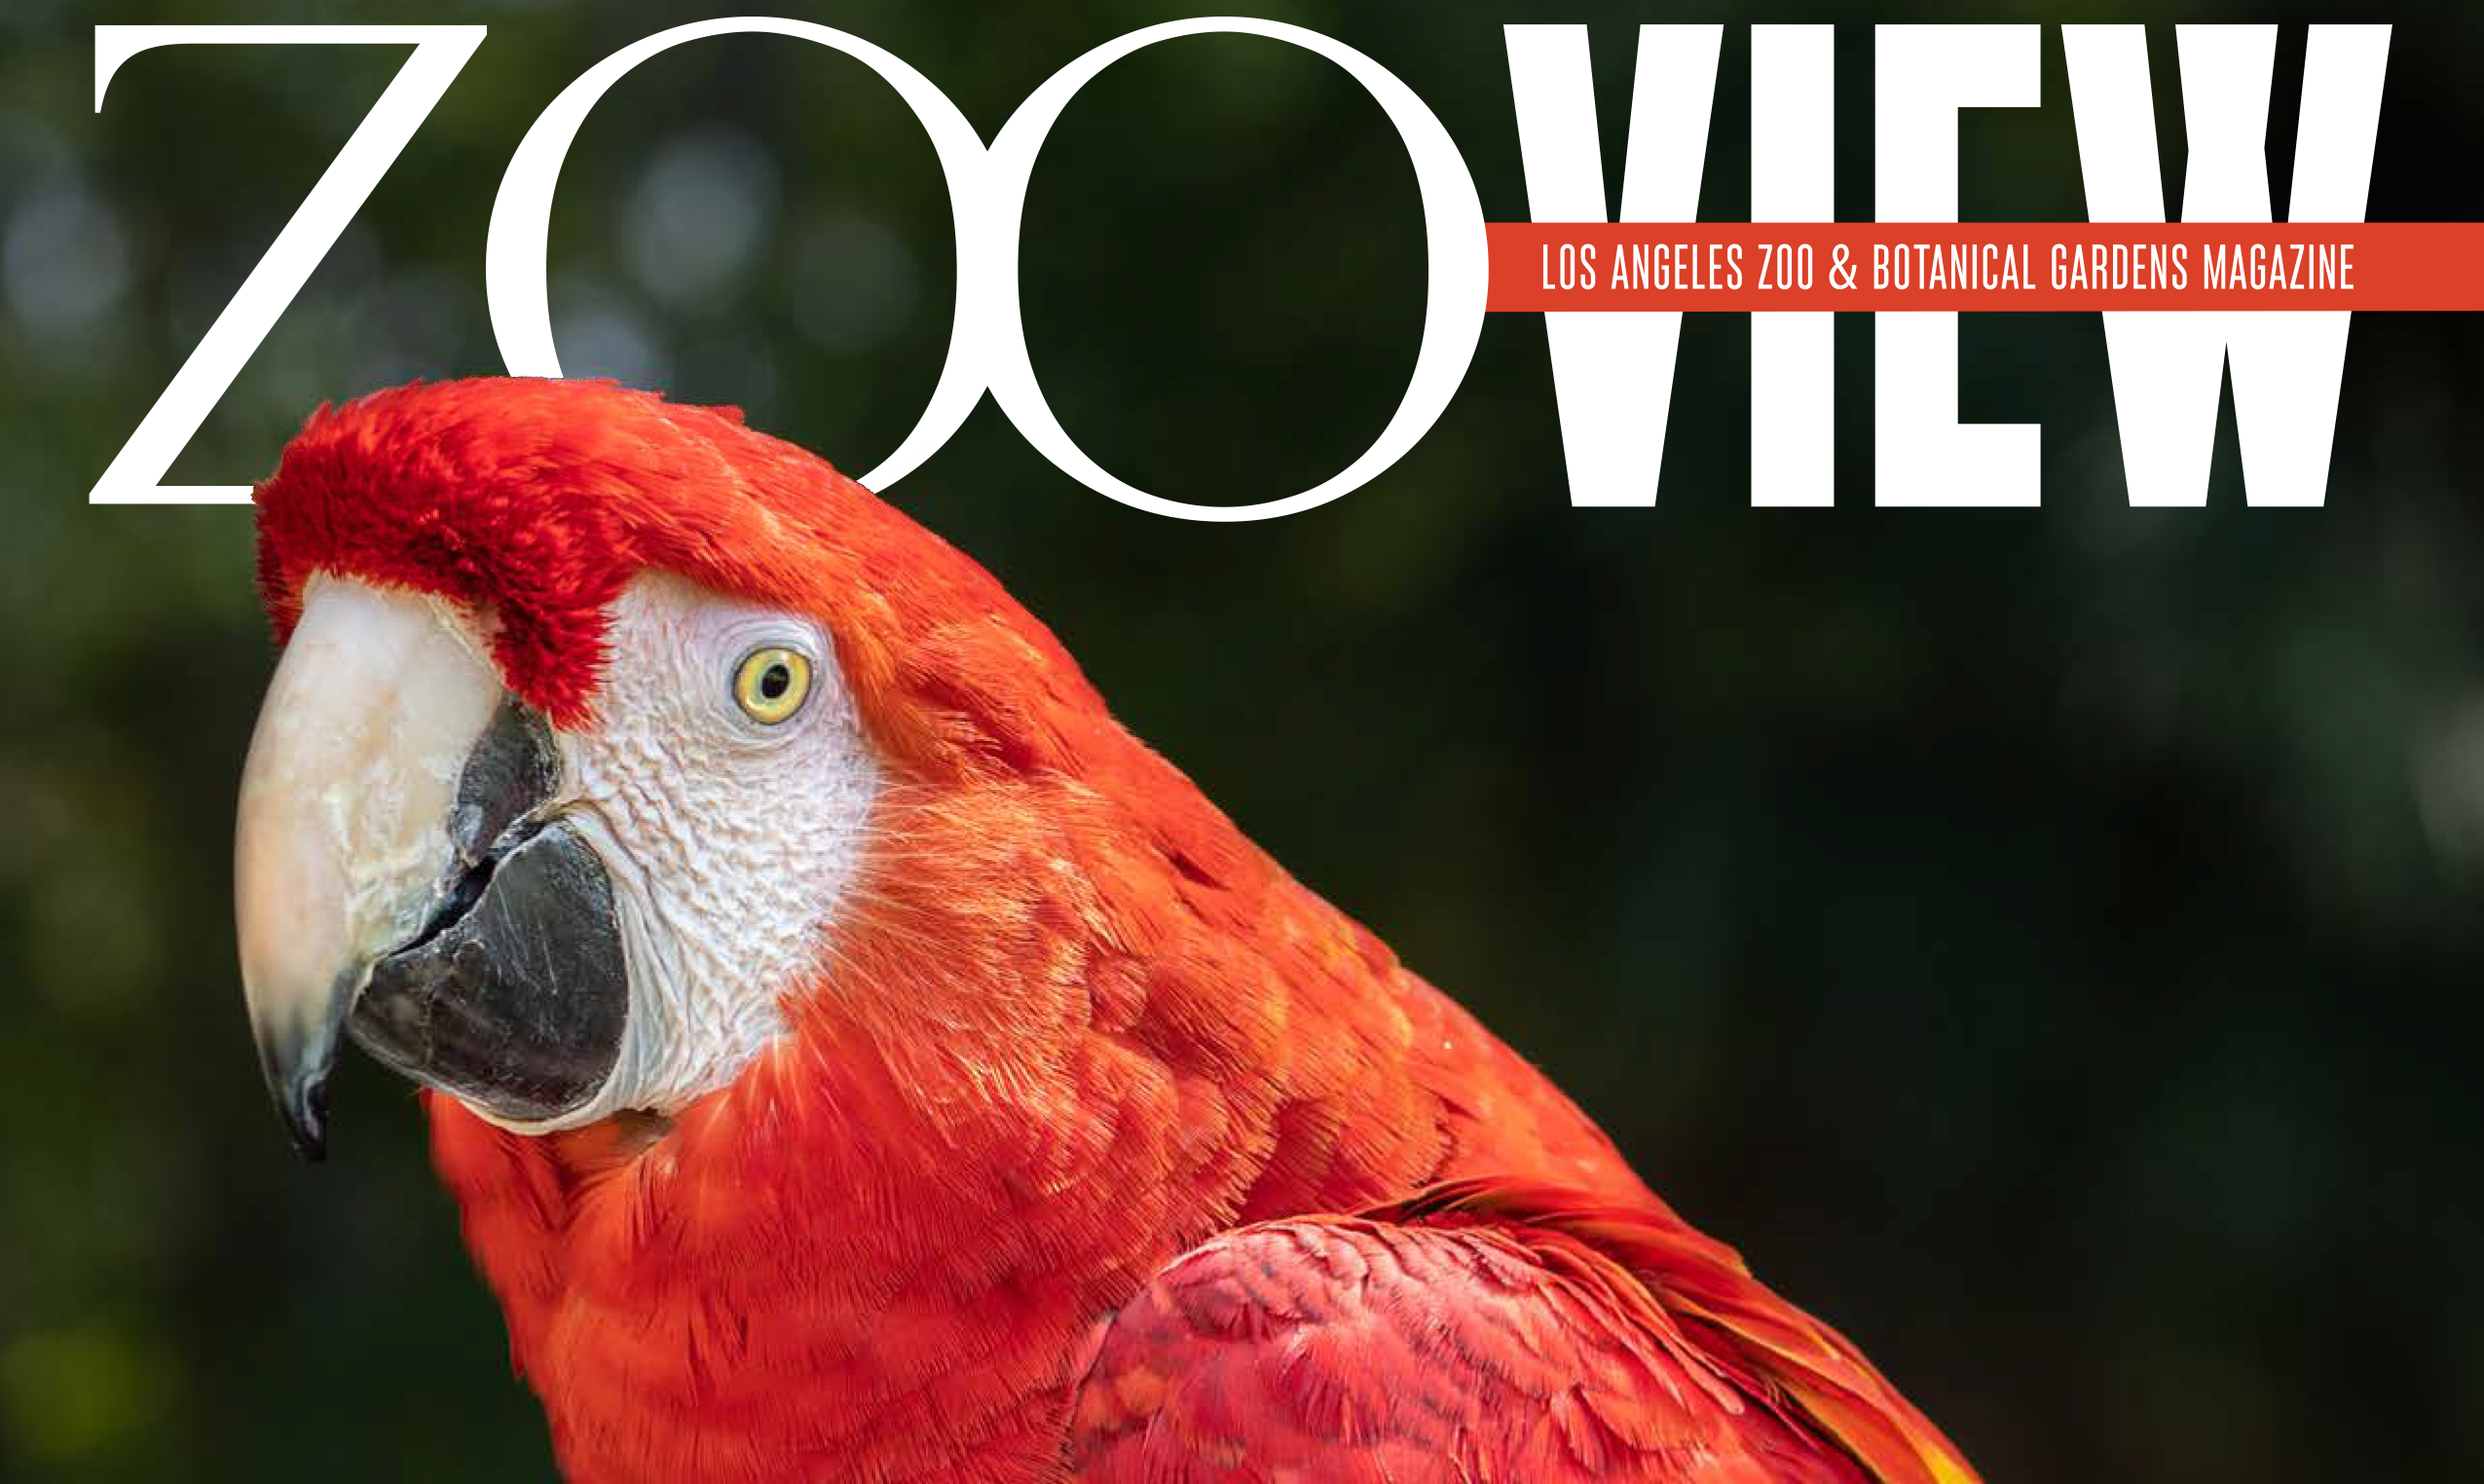 Zoo View magazine cover featuring a scarlet macaw